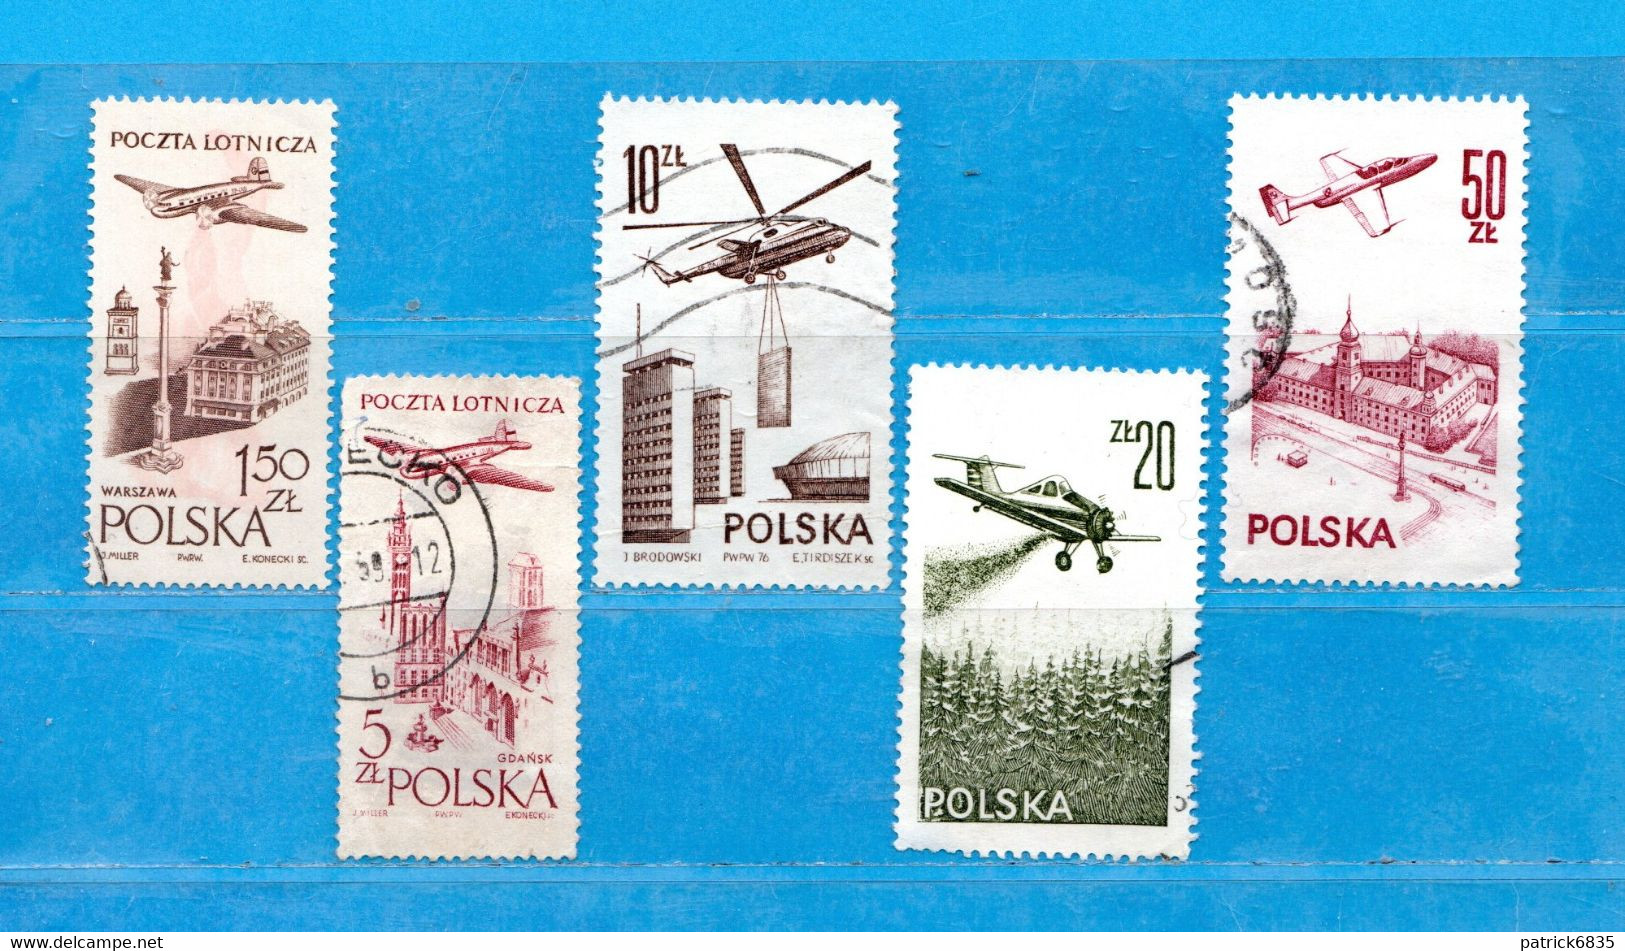 (Us.5) POLONIA ° - AIRMAIL - 1957 à 1978 - AVIONS.  Yv. 42-46-57-56-58.  Oblitéré Come Scansione - Used Stamps